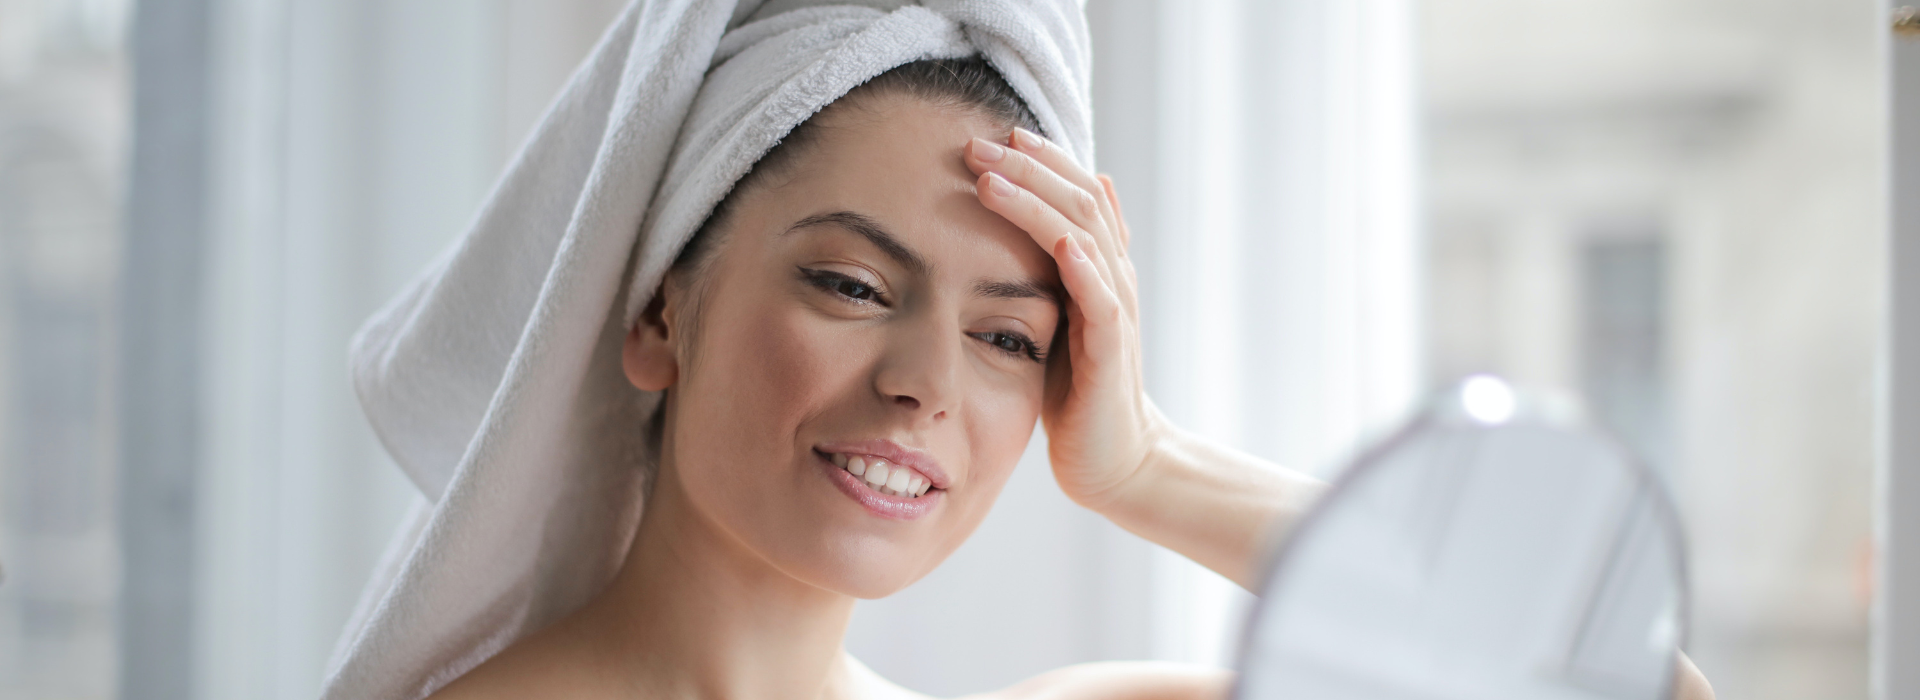 Woman after shower looking at her face in a handheld mirror